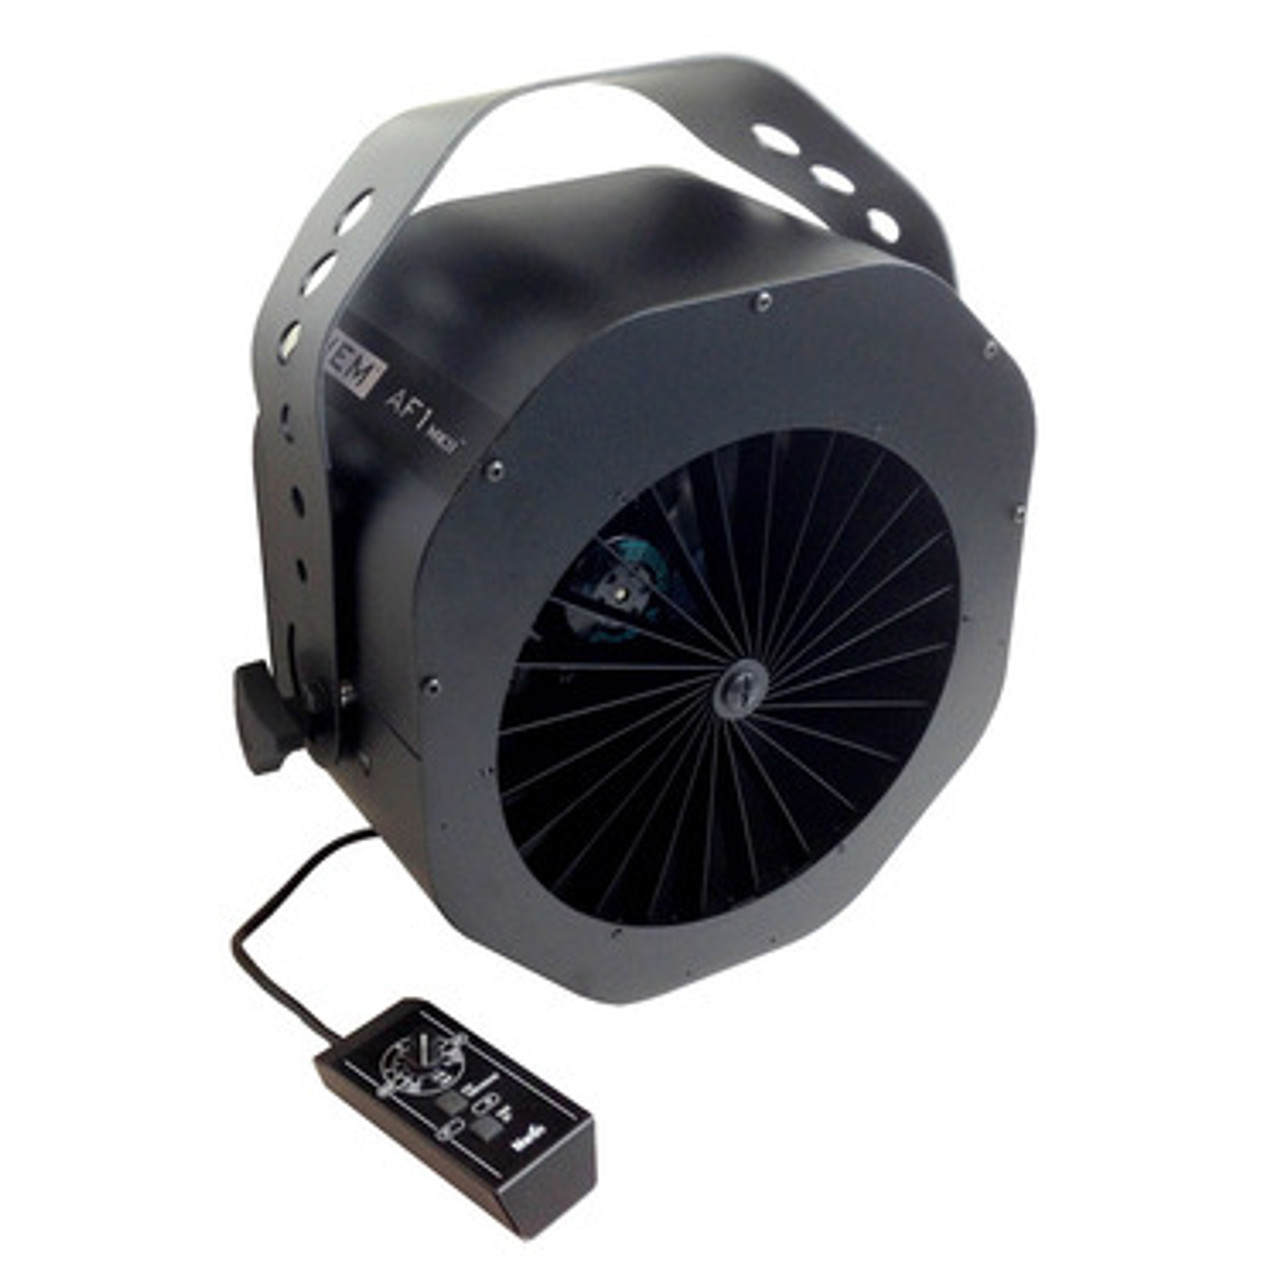  Martin Lighting JEM AF-1 MkII 12" Effect Fan with Variable Speed and Remote Control (92615110)